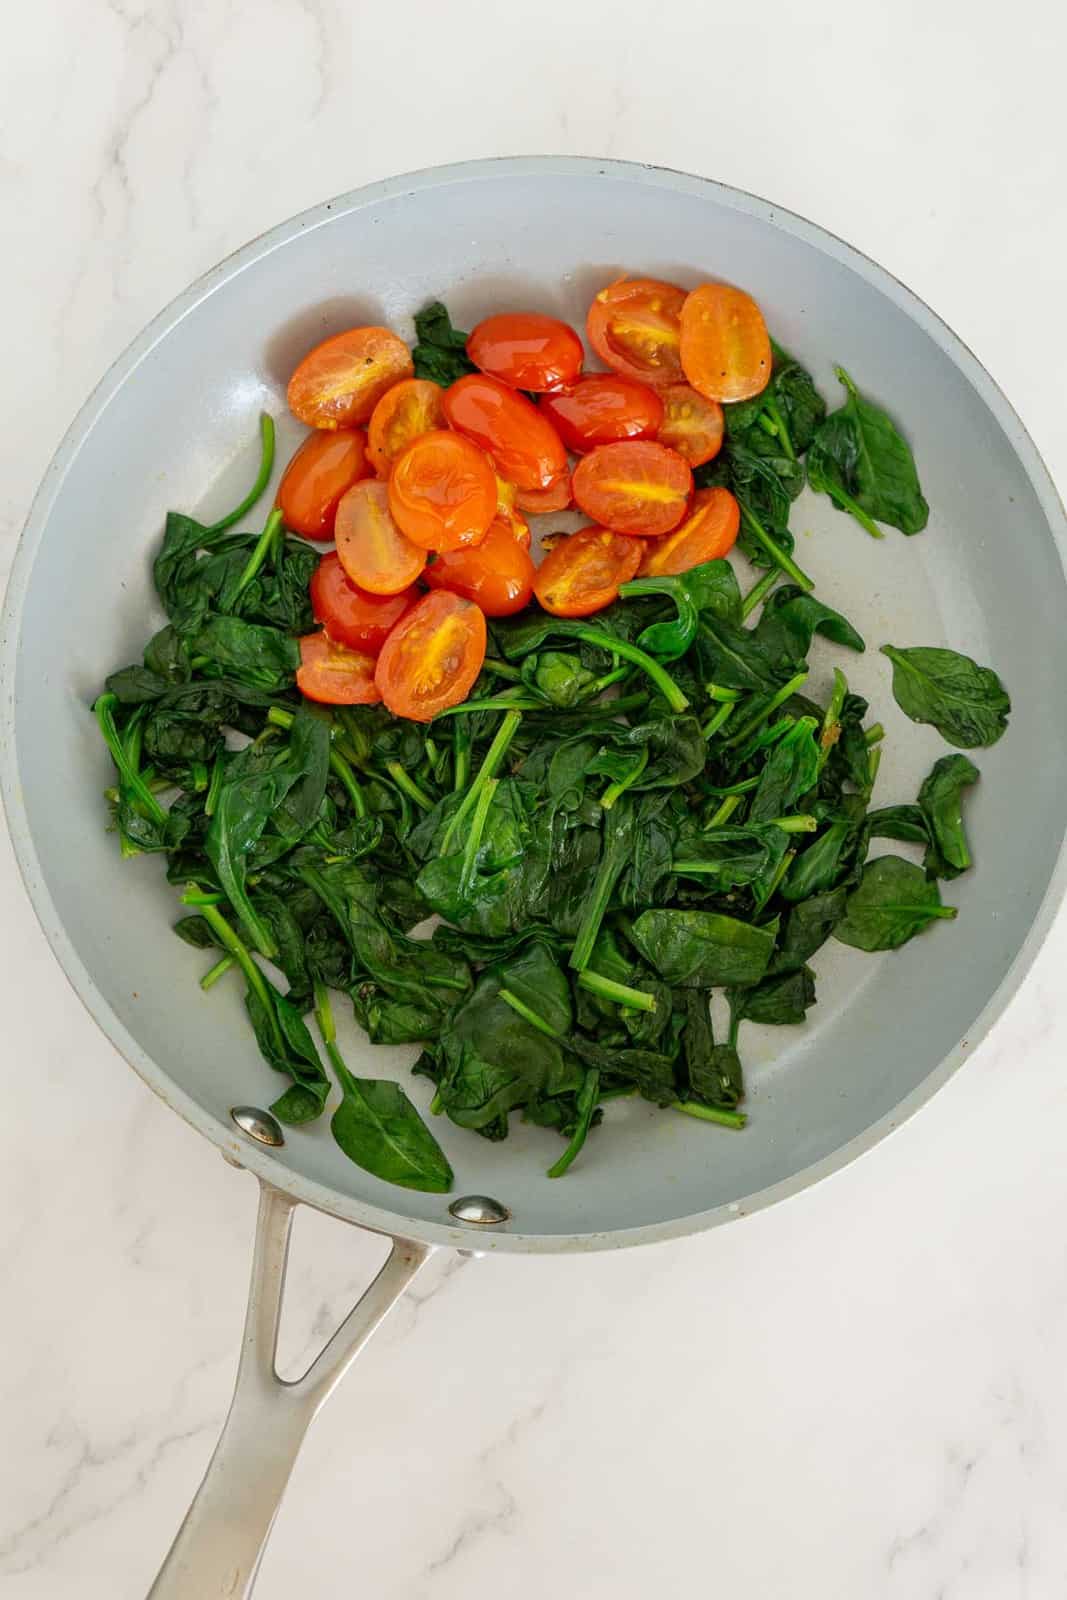 Sauteed spinach and tomatoes in a skillet.